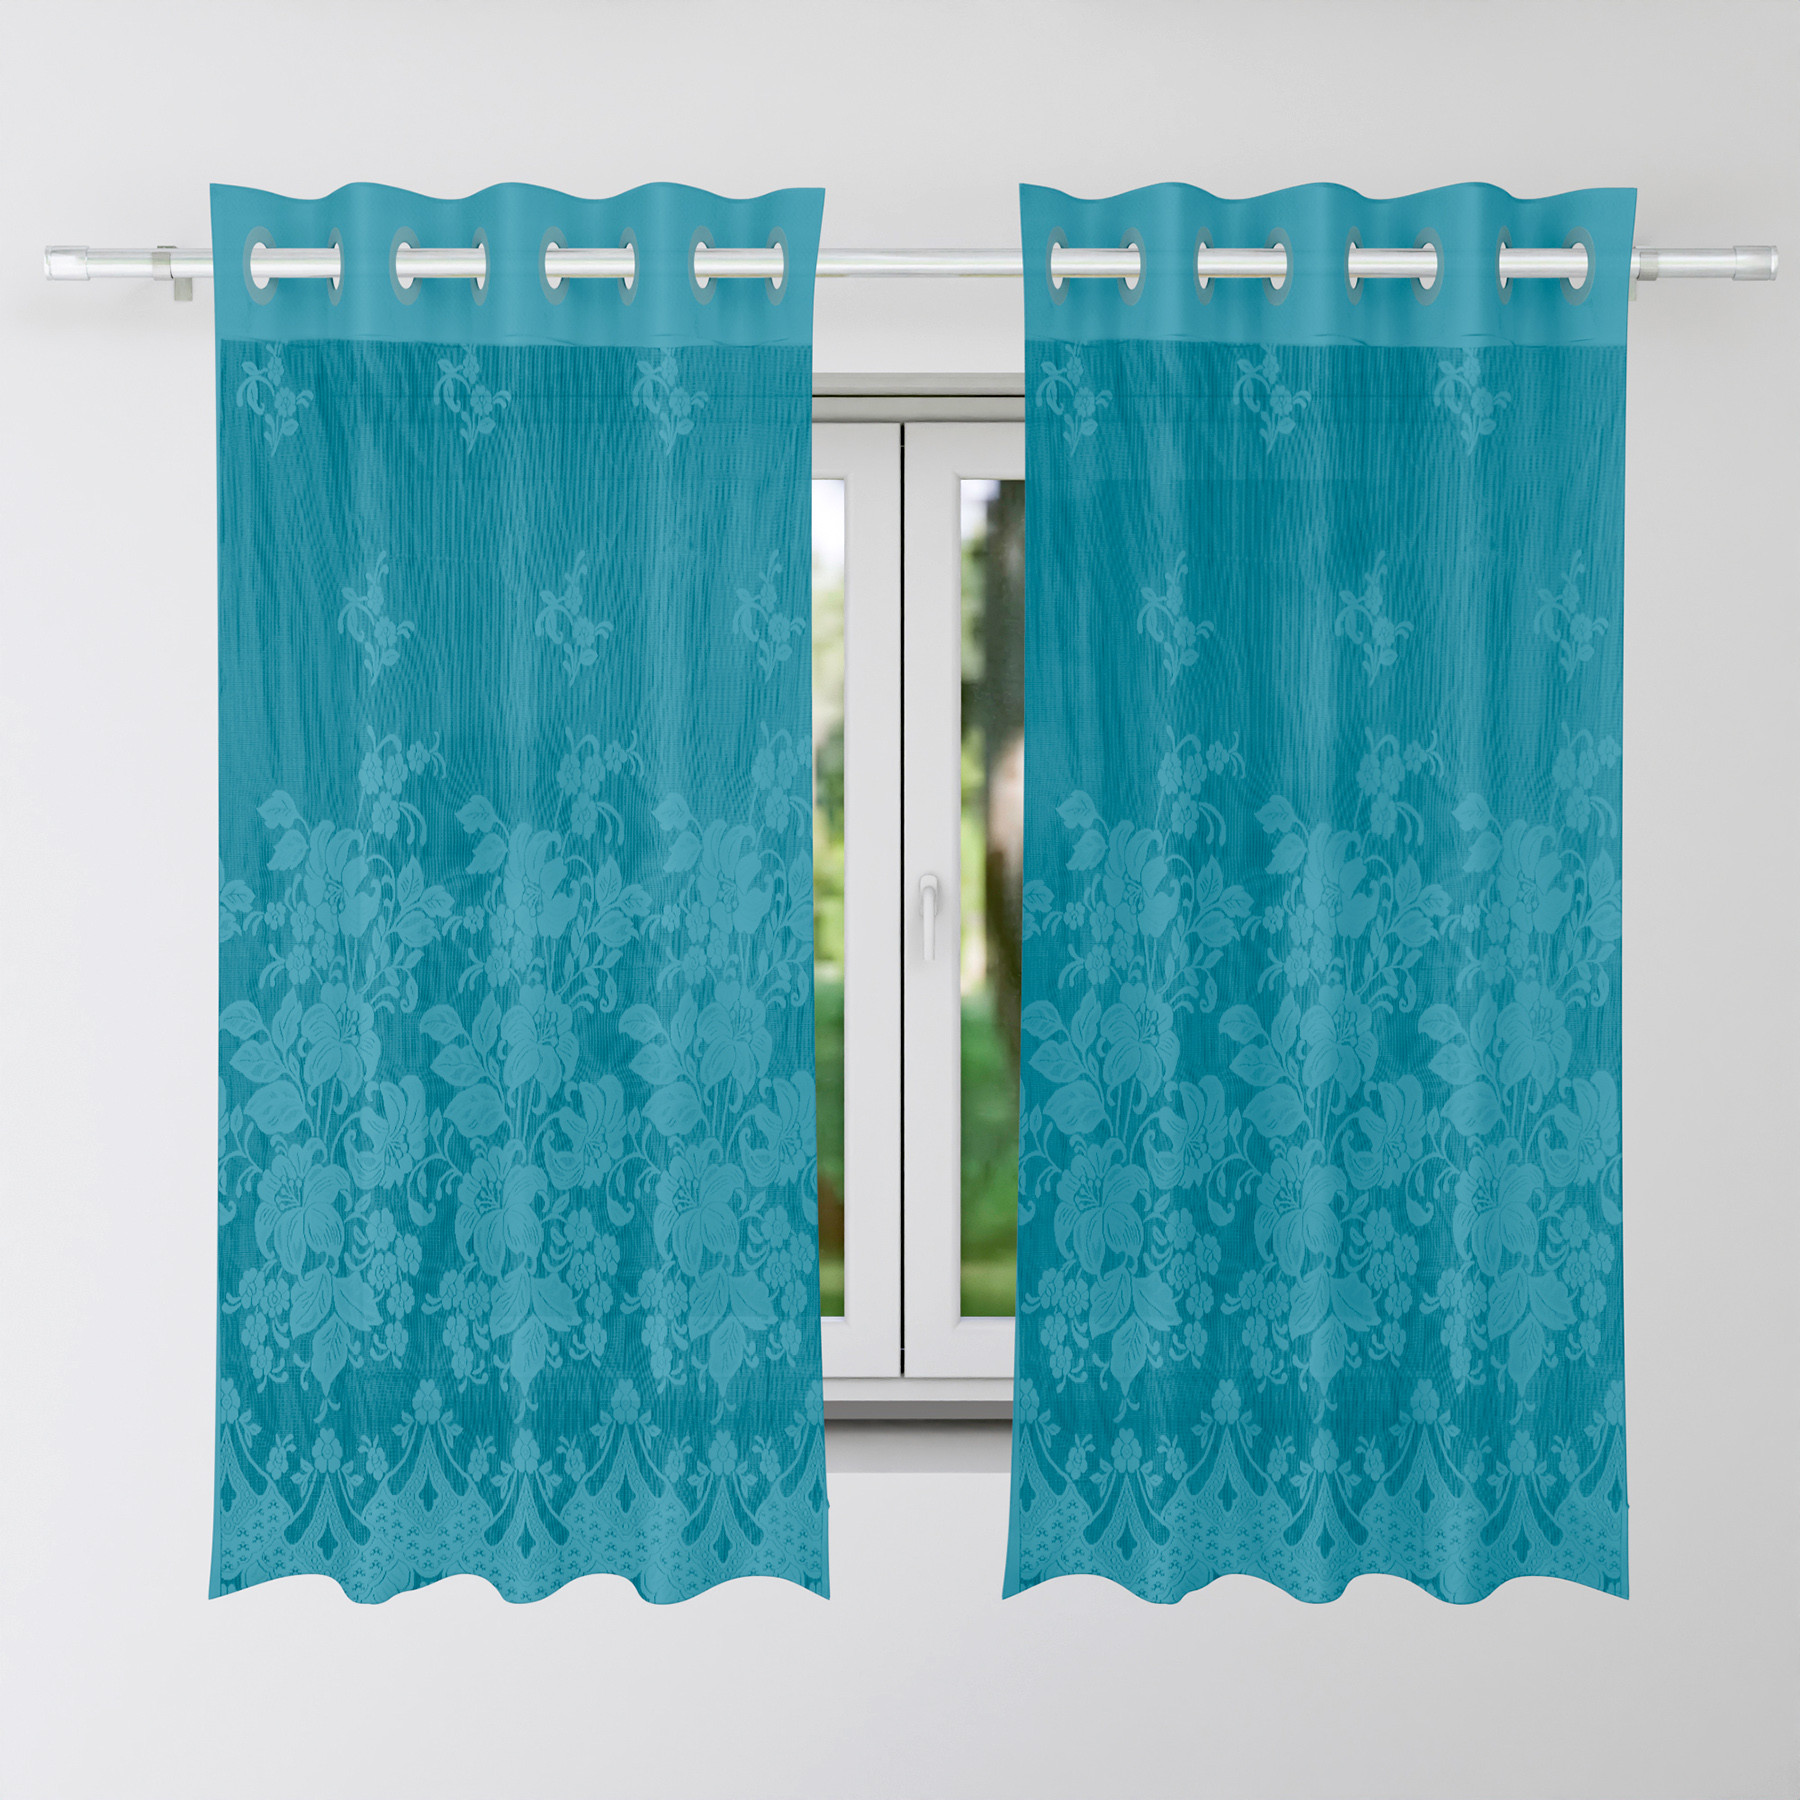 Kuber Industries Window Curtain | Darkening Window Curtains | Sheer Curtain with 8 Rings | Parda for Living Room | Drapes for Bedroom | Net Frill Window Curtain | 5 Ft | SY27 | Green